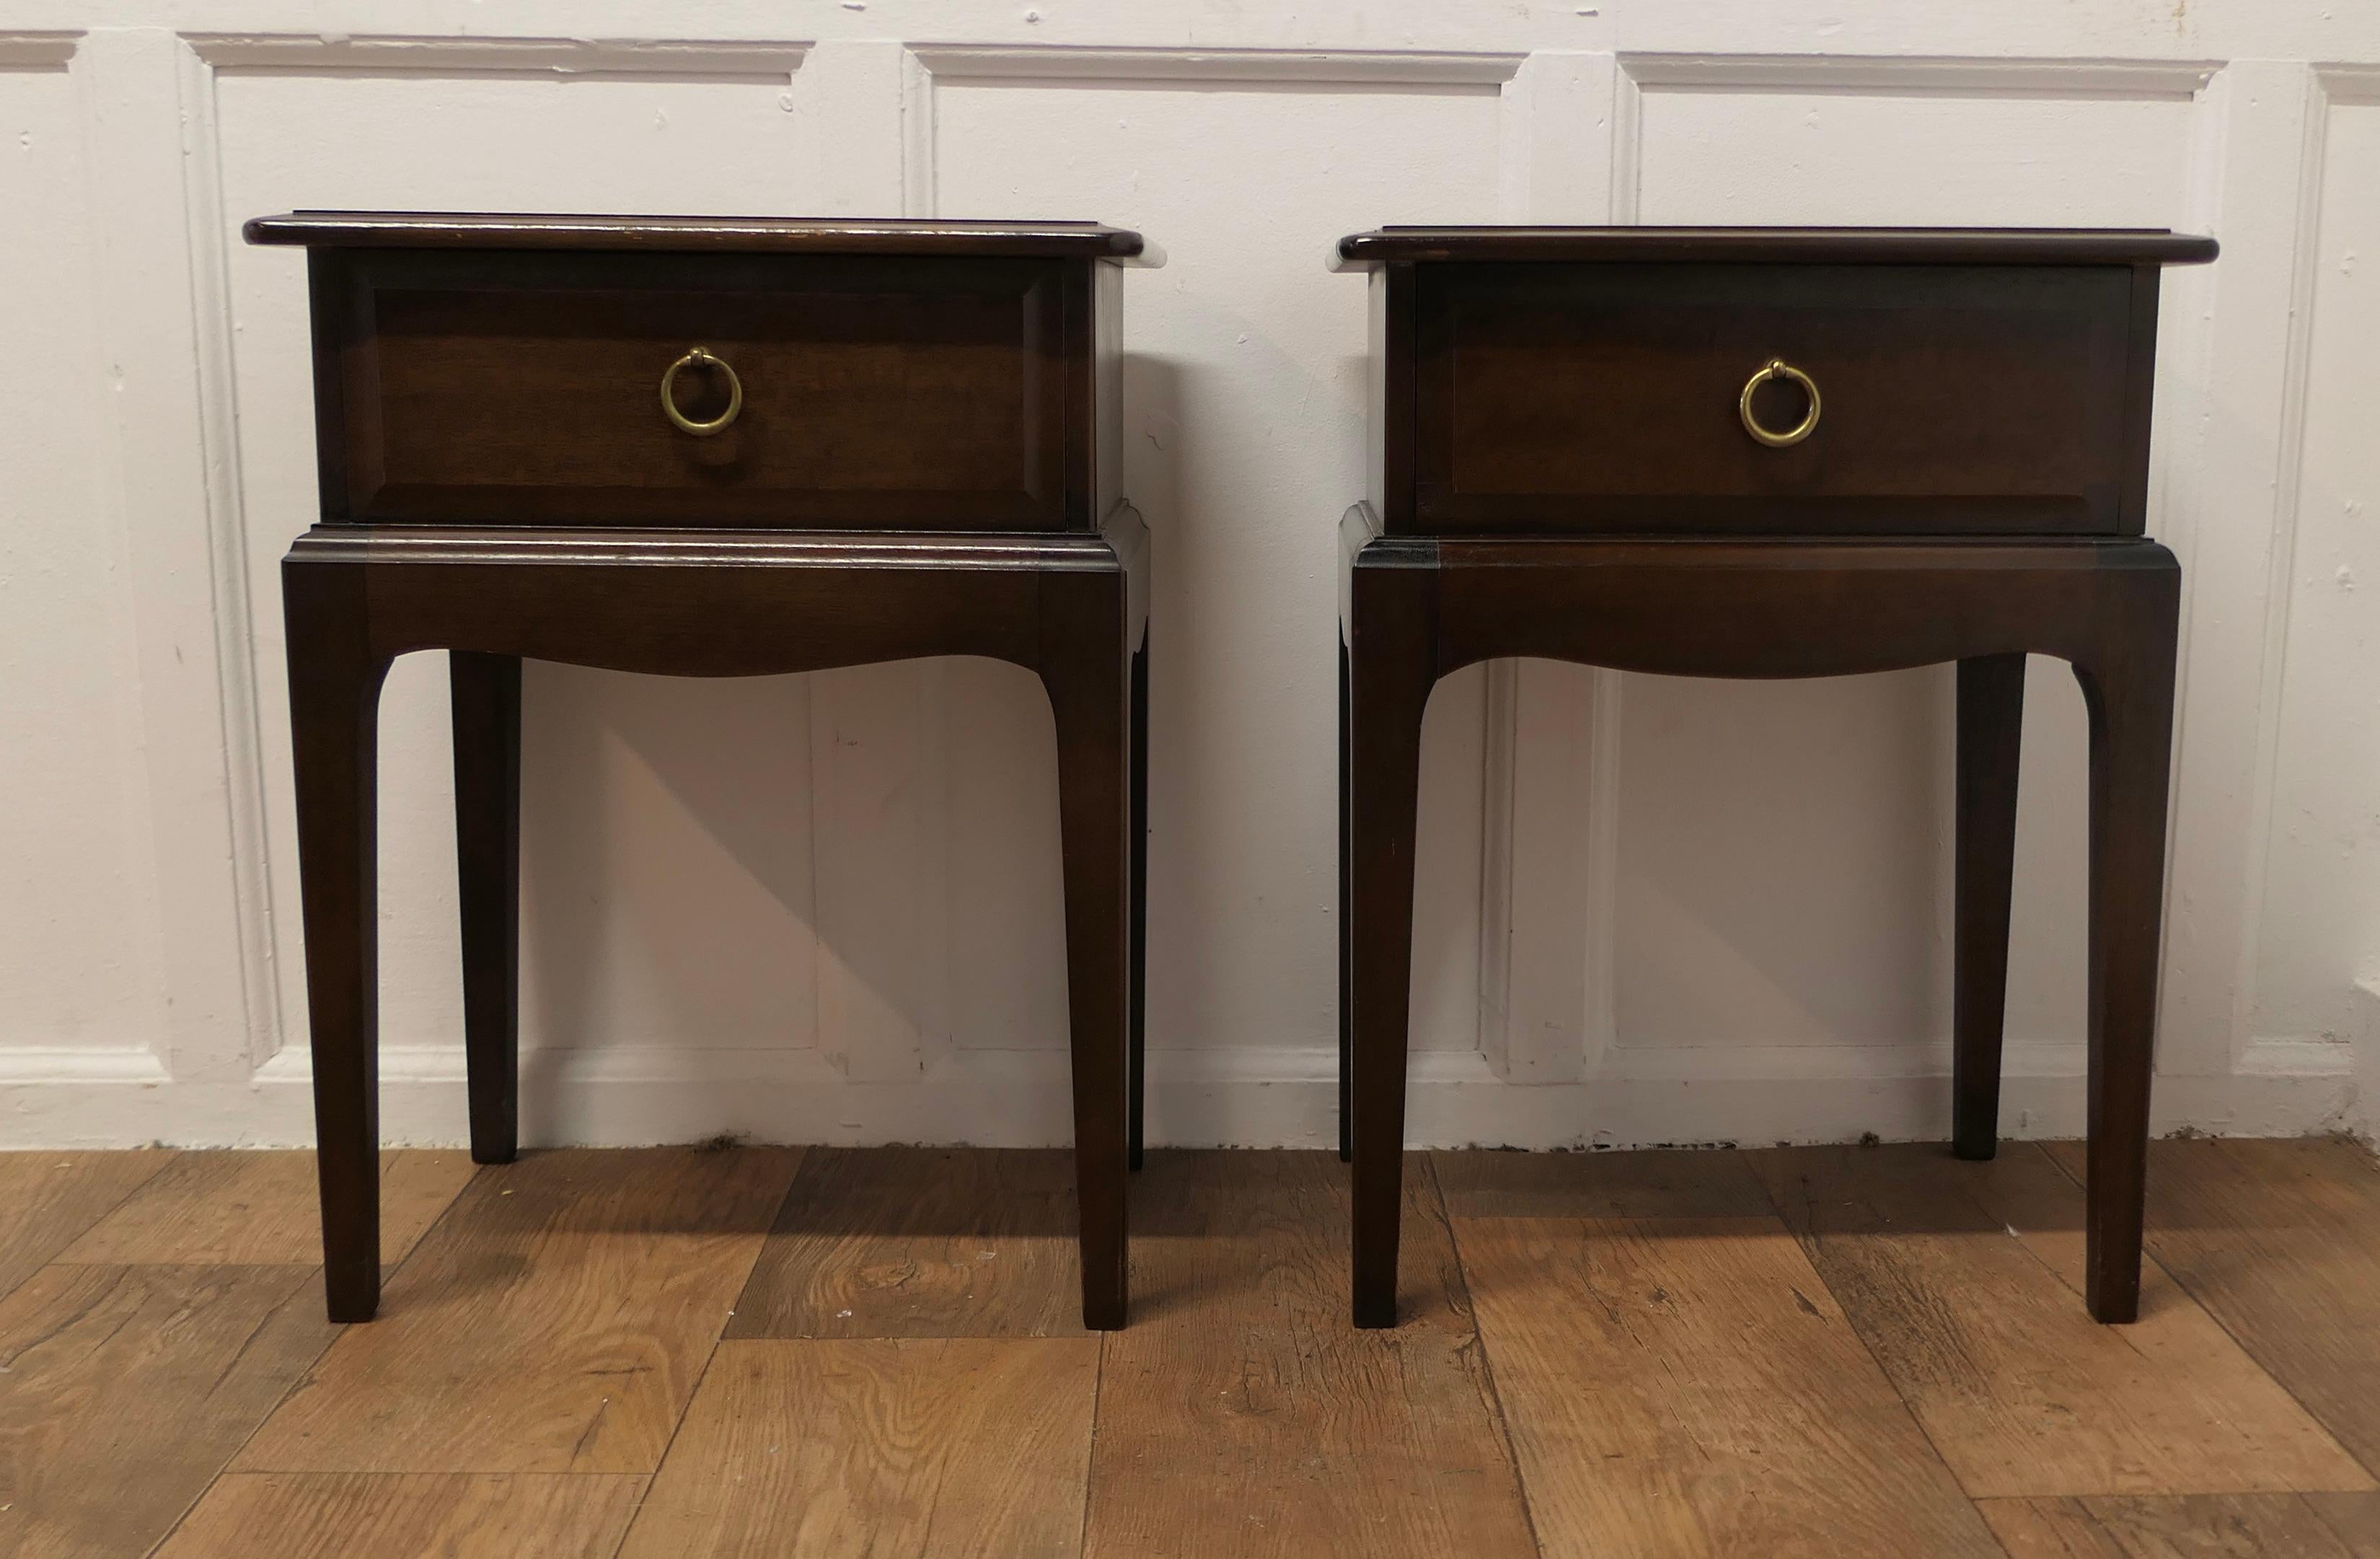 A Pair of Georgian Style Night Tables Bedside Cabinets

These neat cabinets each have a moulded top and a deep drawer, they stand on sturdy square tapering legs with a scalloped apron
The Cabinets are in good condition they are 18” wide, 23” tall